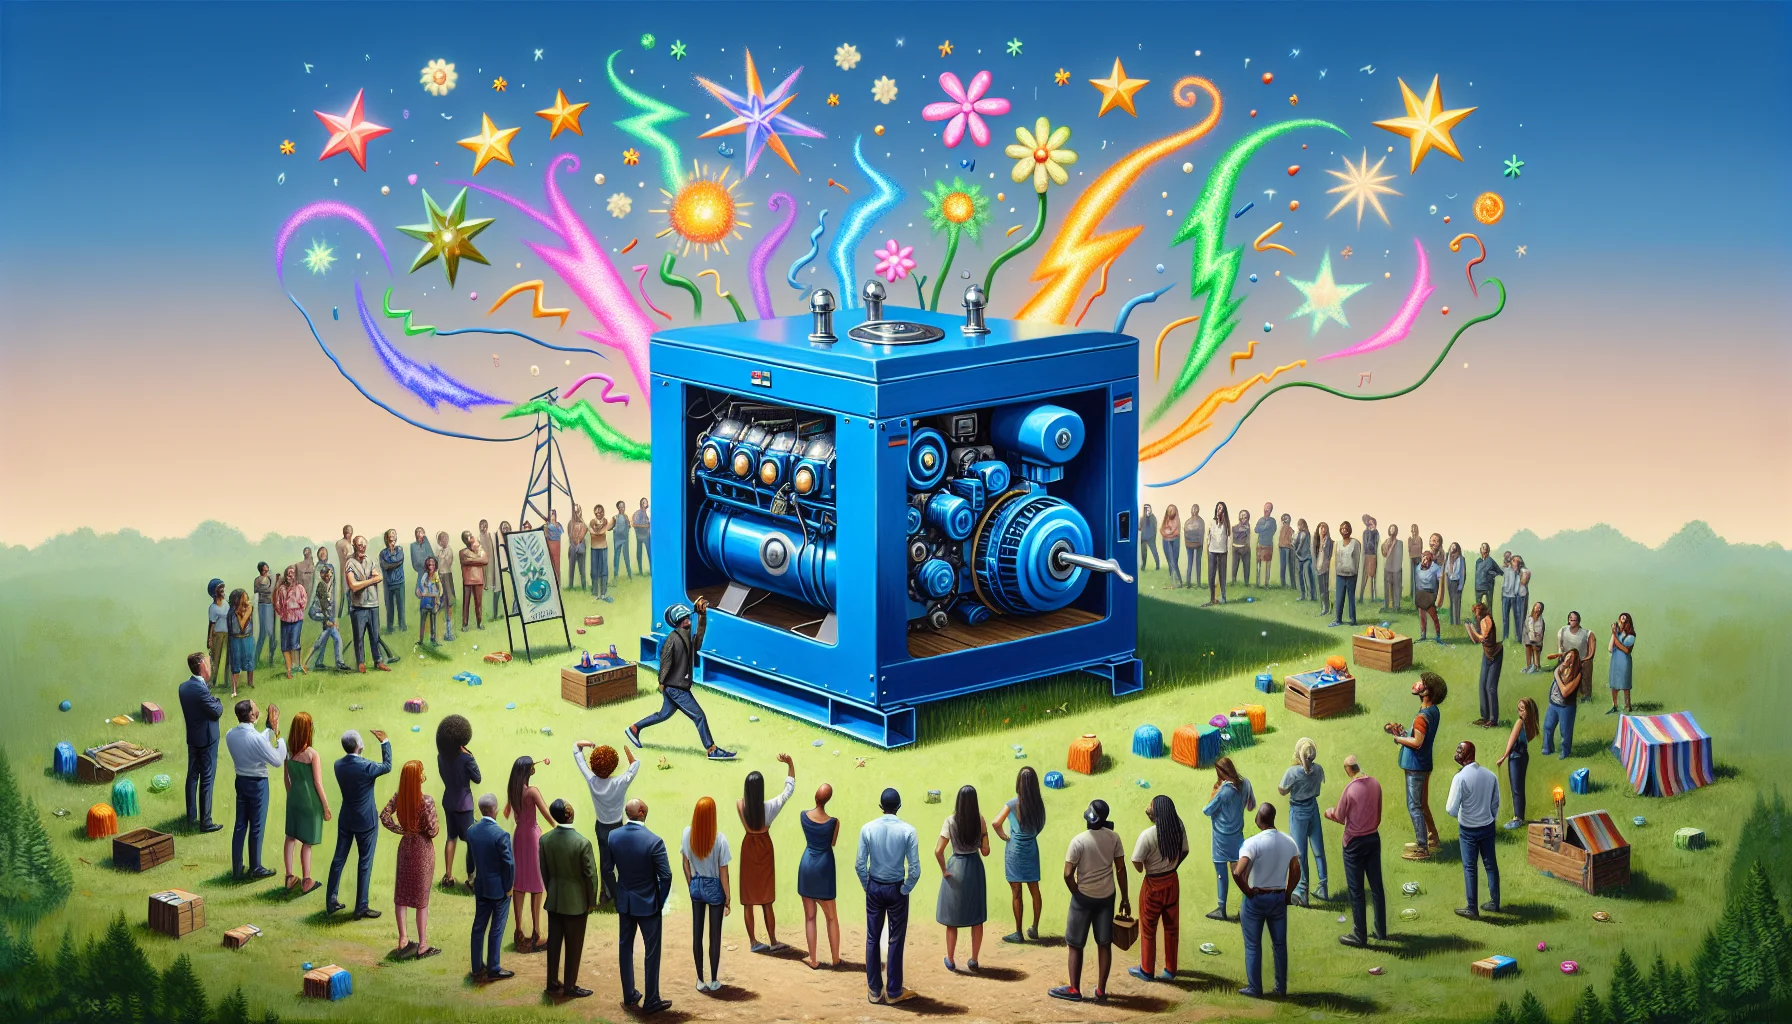 Create a whimsical scene with a variety of generators situated in an open field. The biggest generator, painted royal blue, has a shiny silver key in its ignition and is sending colourful sparks of electricity that form playful shapes like flowers and stars. Crowd of people standing by of diverse desents including Caucasian, Black, and Middle-Eastern, and of various genders, all shown reacting with excitement and awe at the sight. A bright sign in the corner reads 'Feel the Power!'